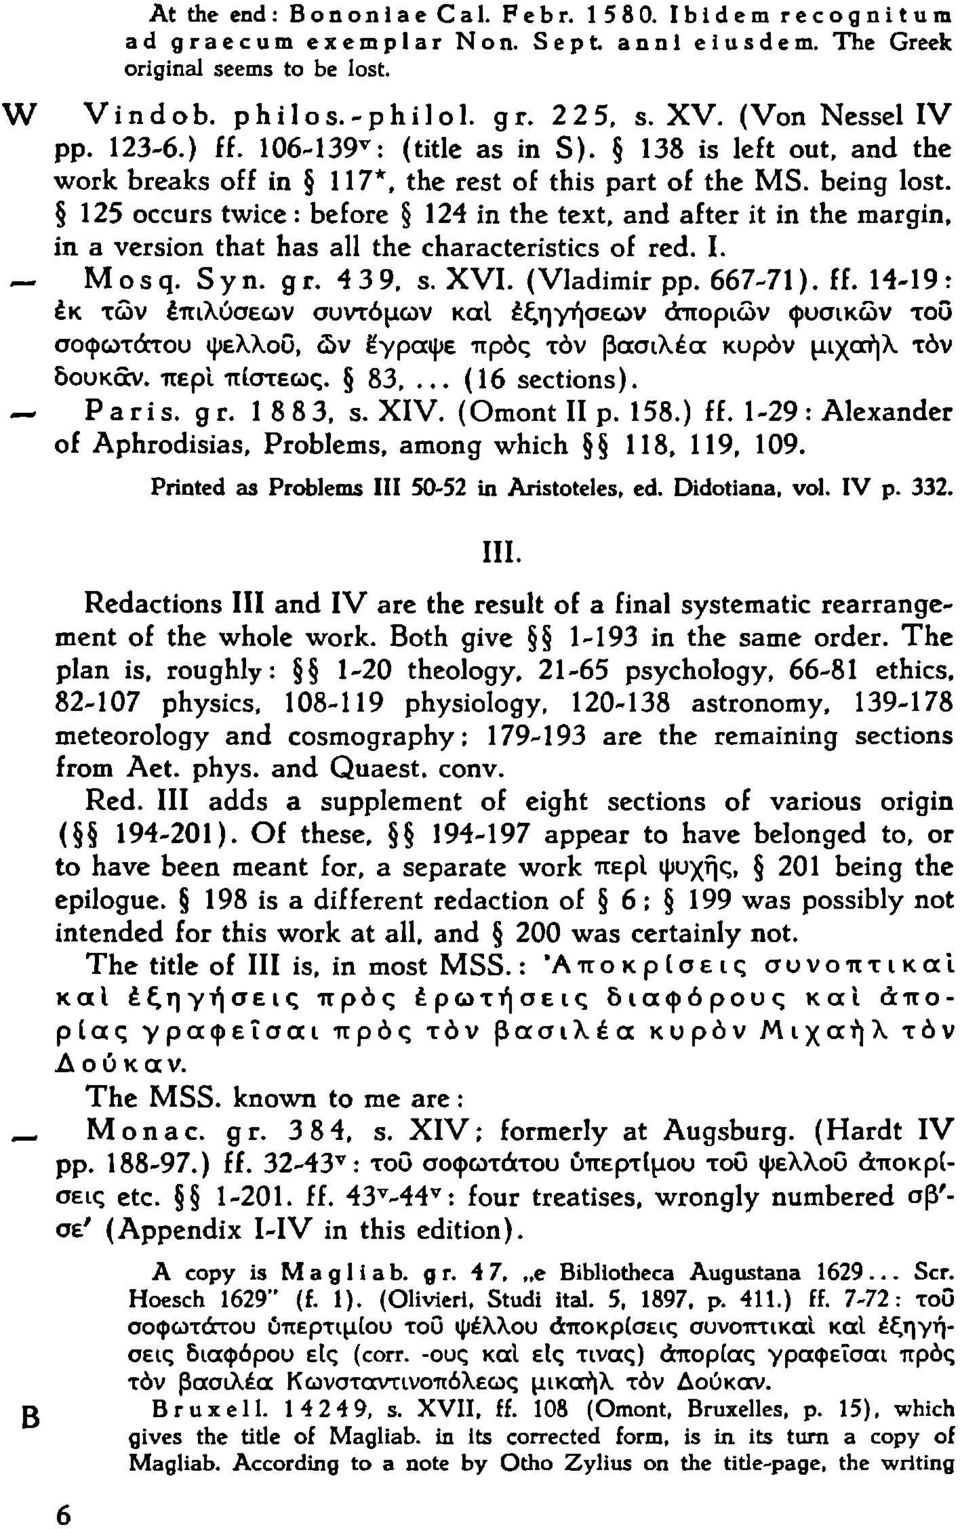 125 occurs twice : before 124 in the text, and after it in the margin, in a version that has all the characteristics of red. I. Mosq. Syn. gr. 4 3 9. s. XVI. (Vladimir pp. 667-71). ff.